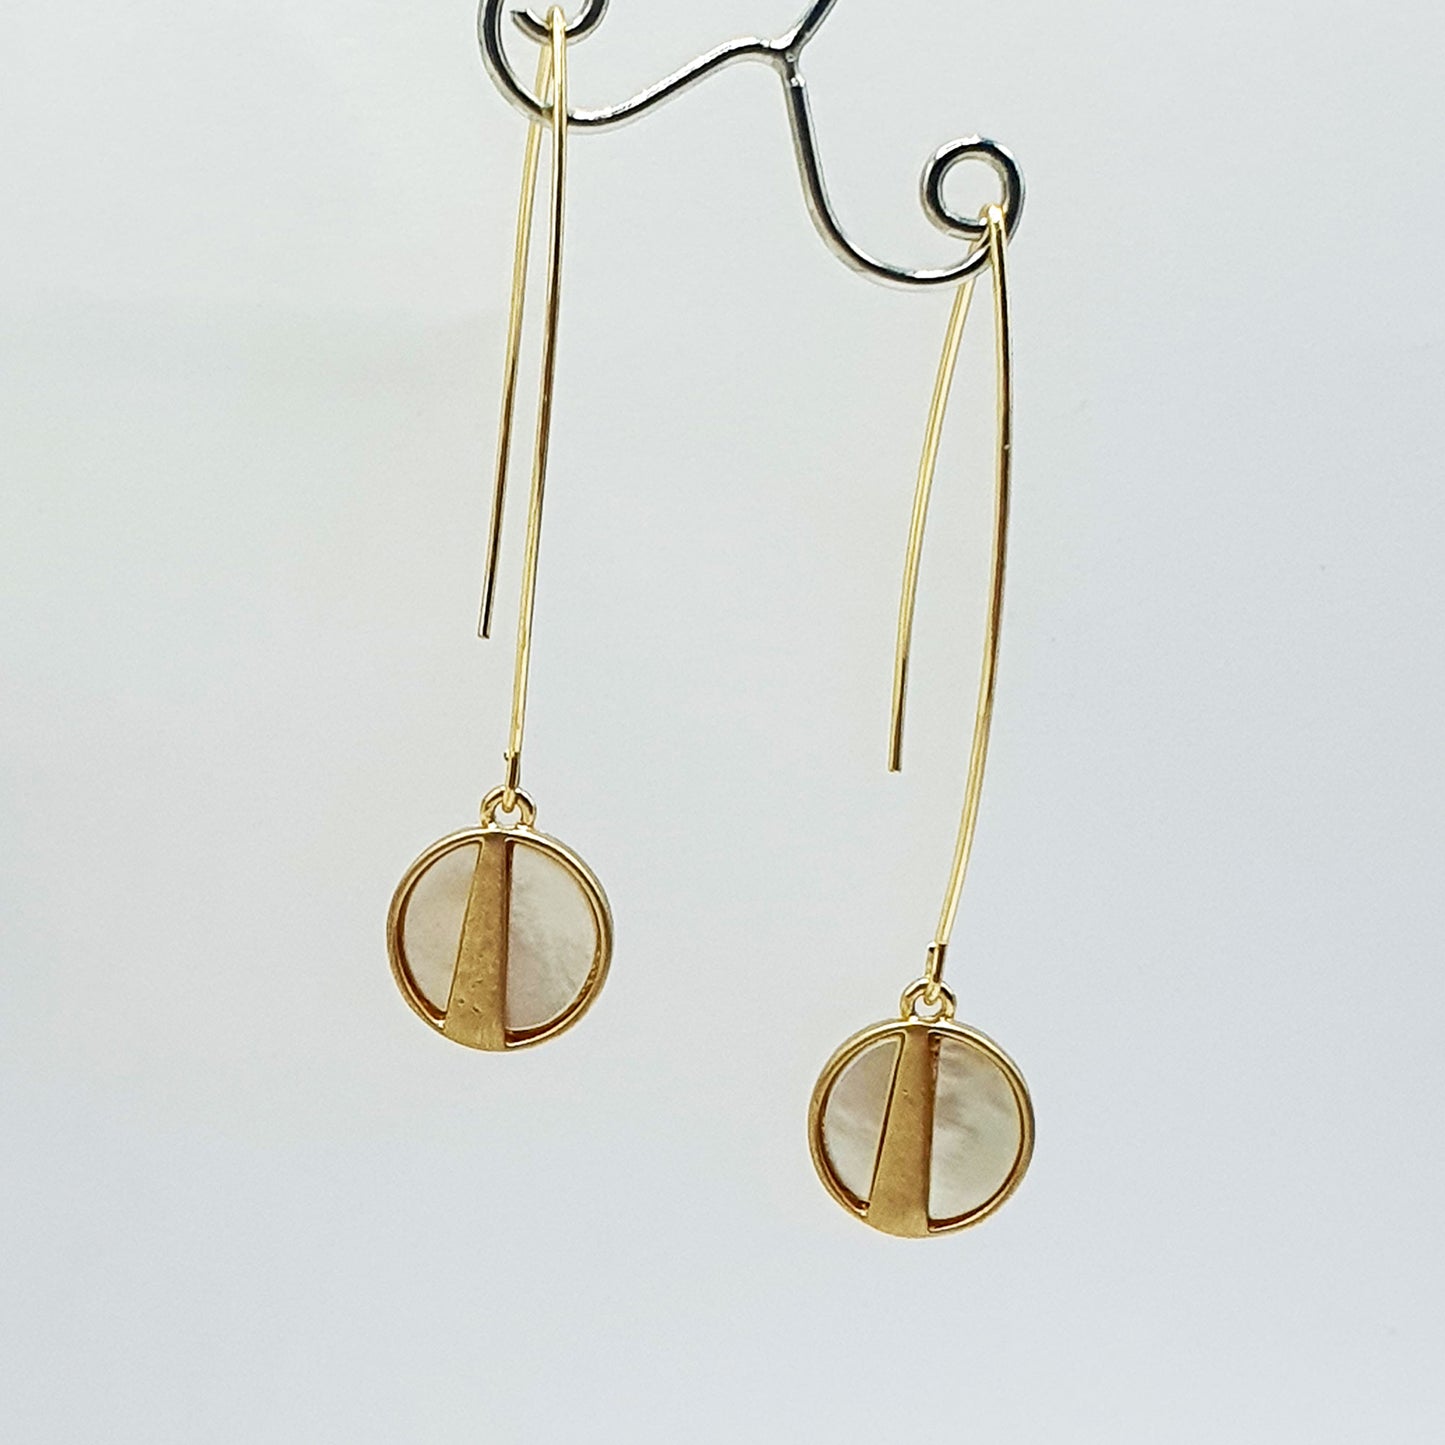 Marbled mother of pearl discs in gold plate on long oval earwires